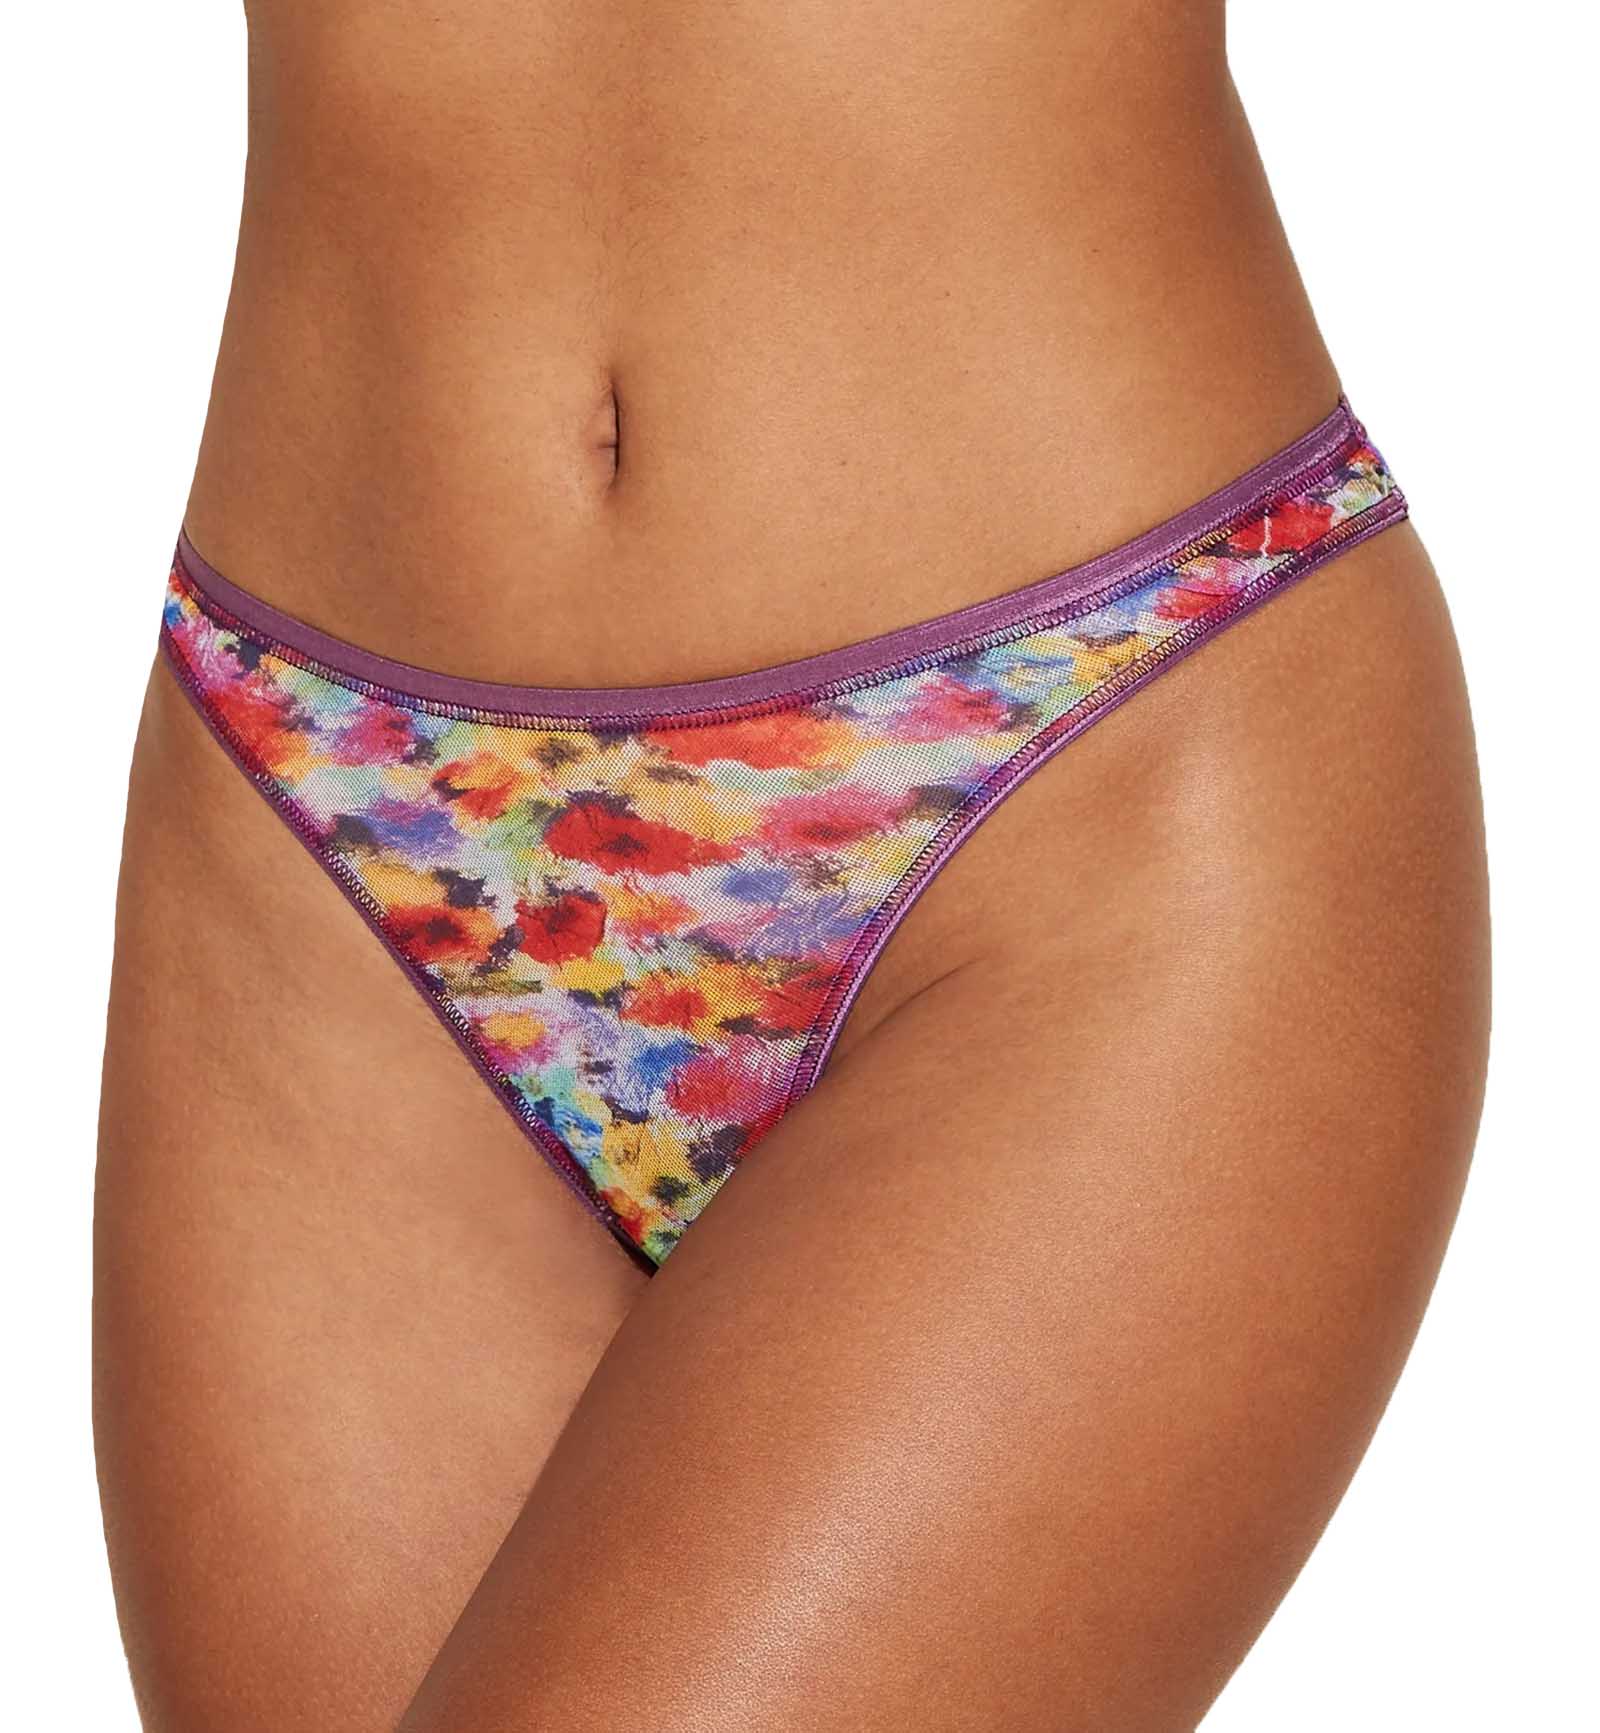 Cosabella Soire Confidence Print Classic Thong (SOICP0322),S/M,Floral Beauty - Floral Beauty,S/M